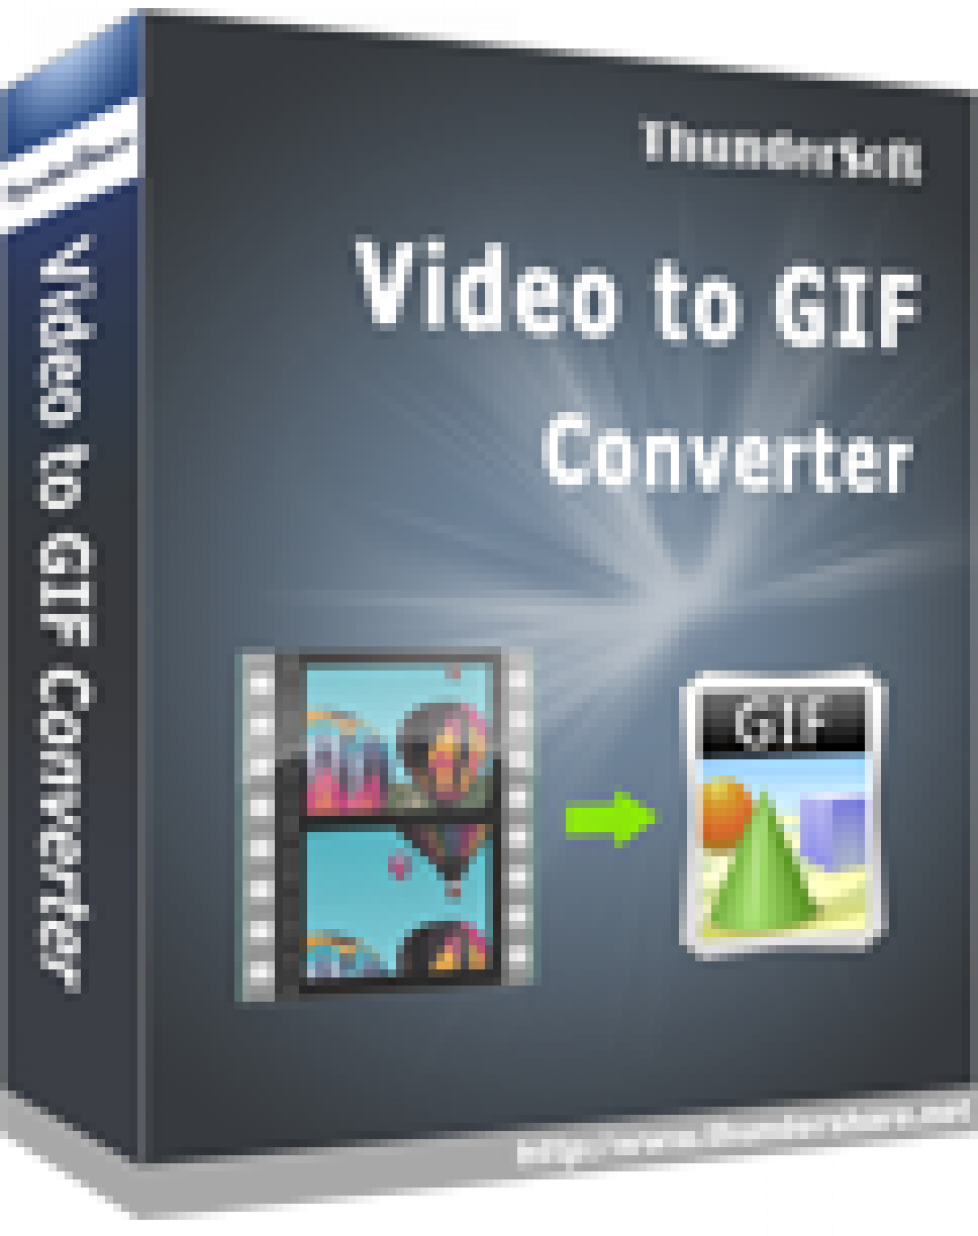 ThunderSoft GIF Converter 5.2.0 download the new version for mac